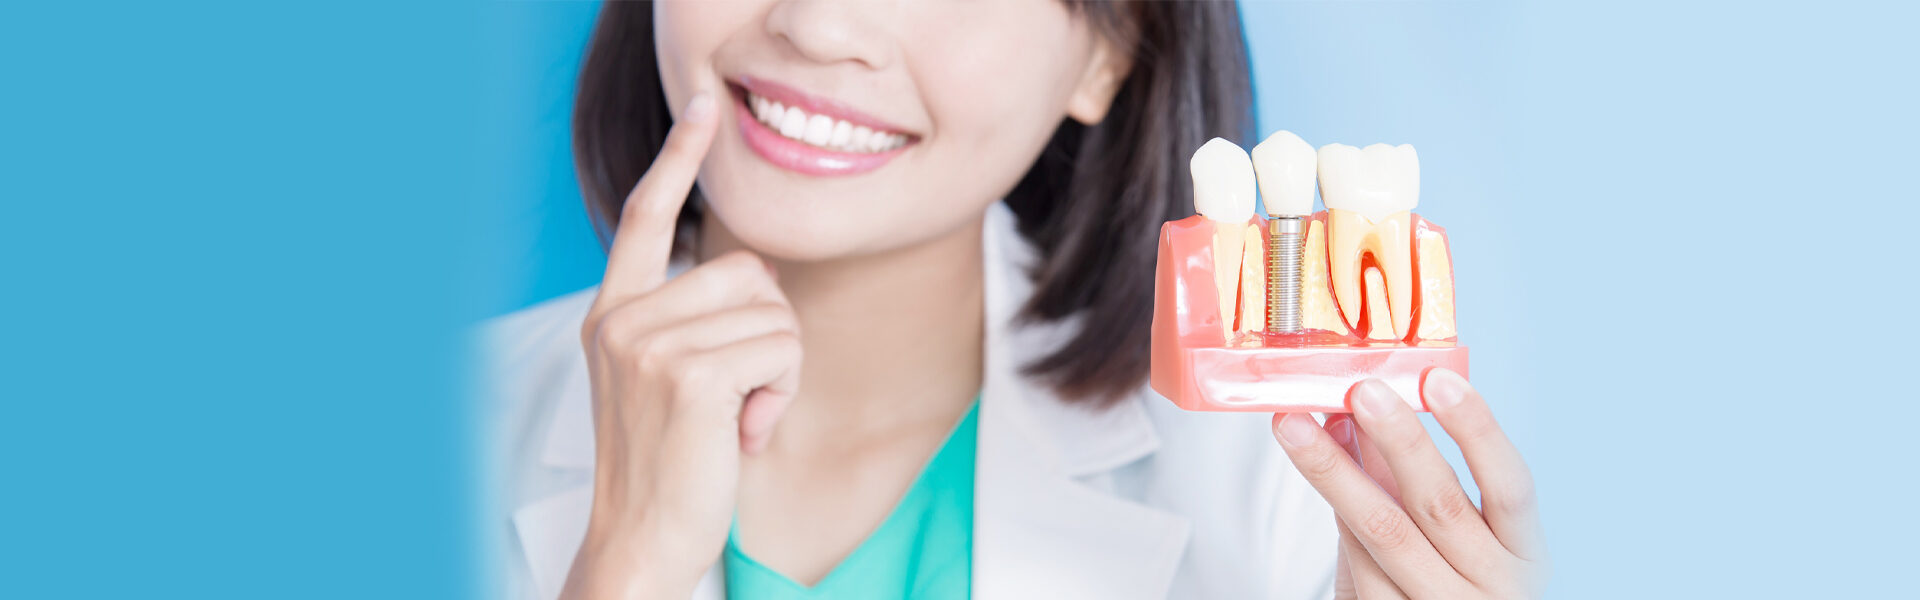 Tooth Extractions  in Morristown, NJ